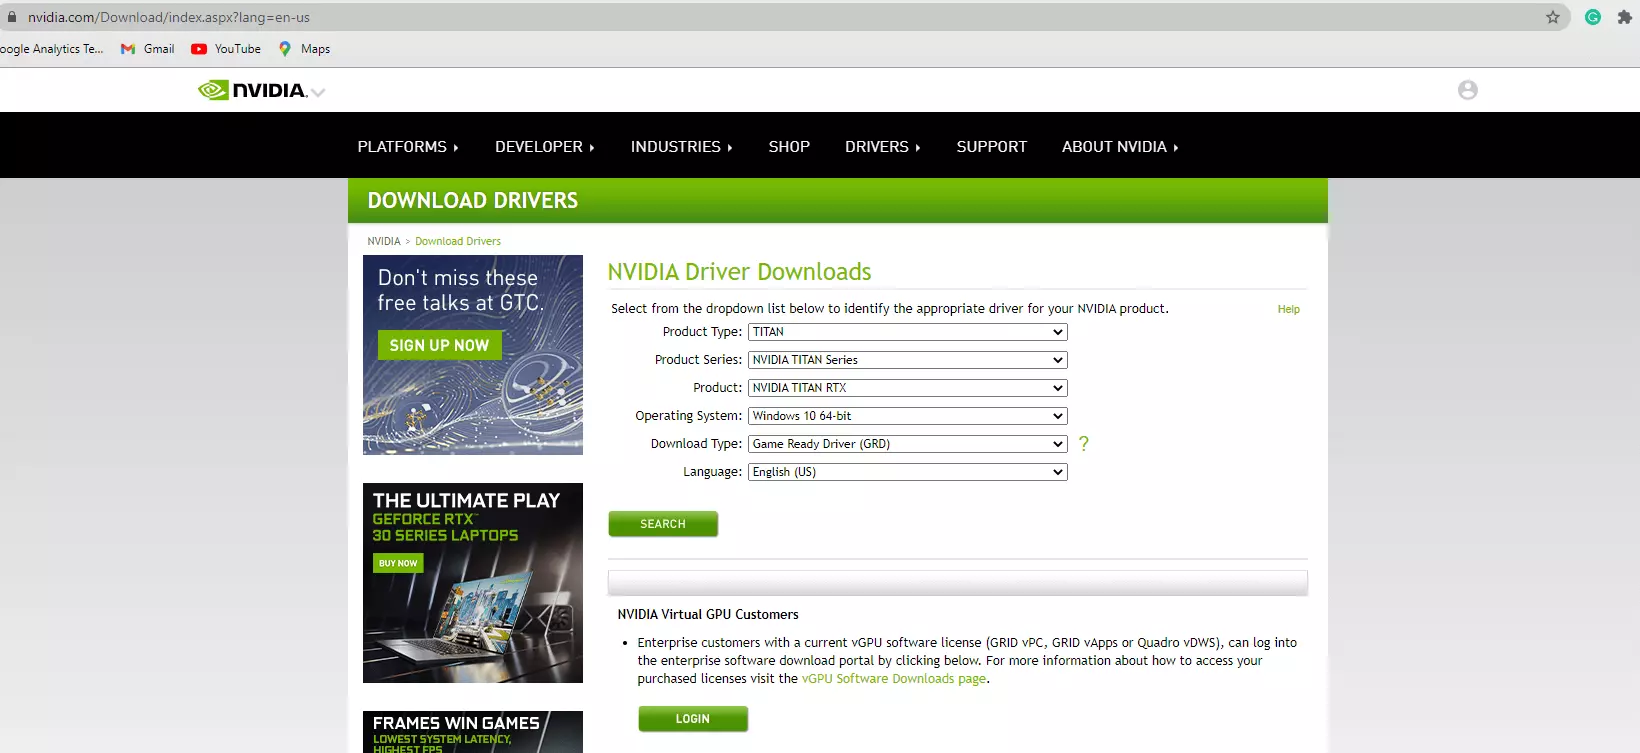 Update NVIDIA Drivers Manually by Downloading Them on NVIDIA’S Website